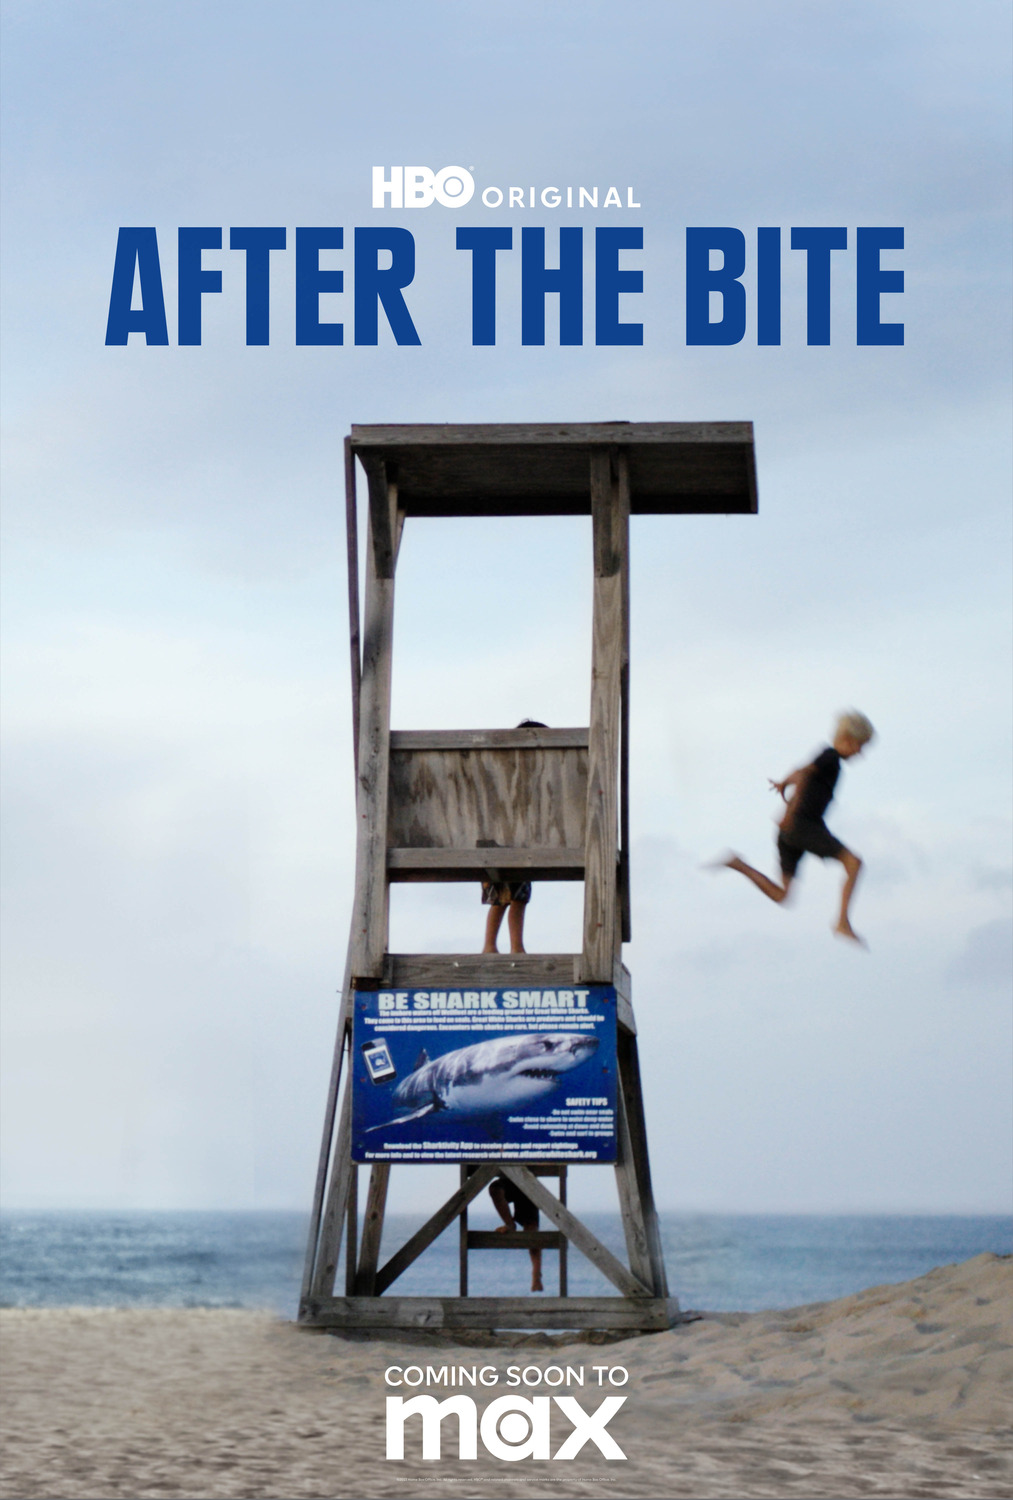 Extra Large Movie Poster Image for After the Bite (#2 of 2)